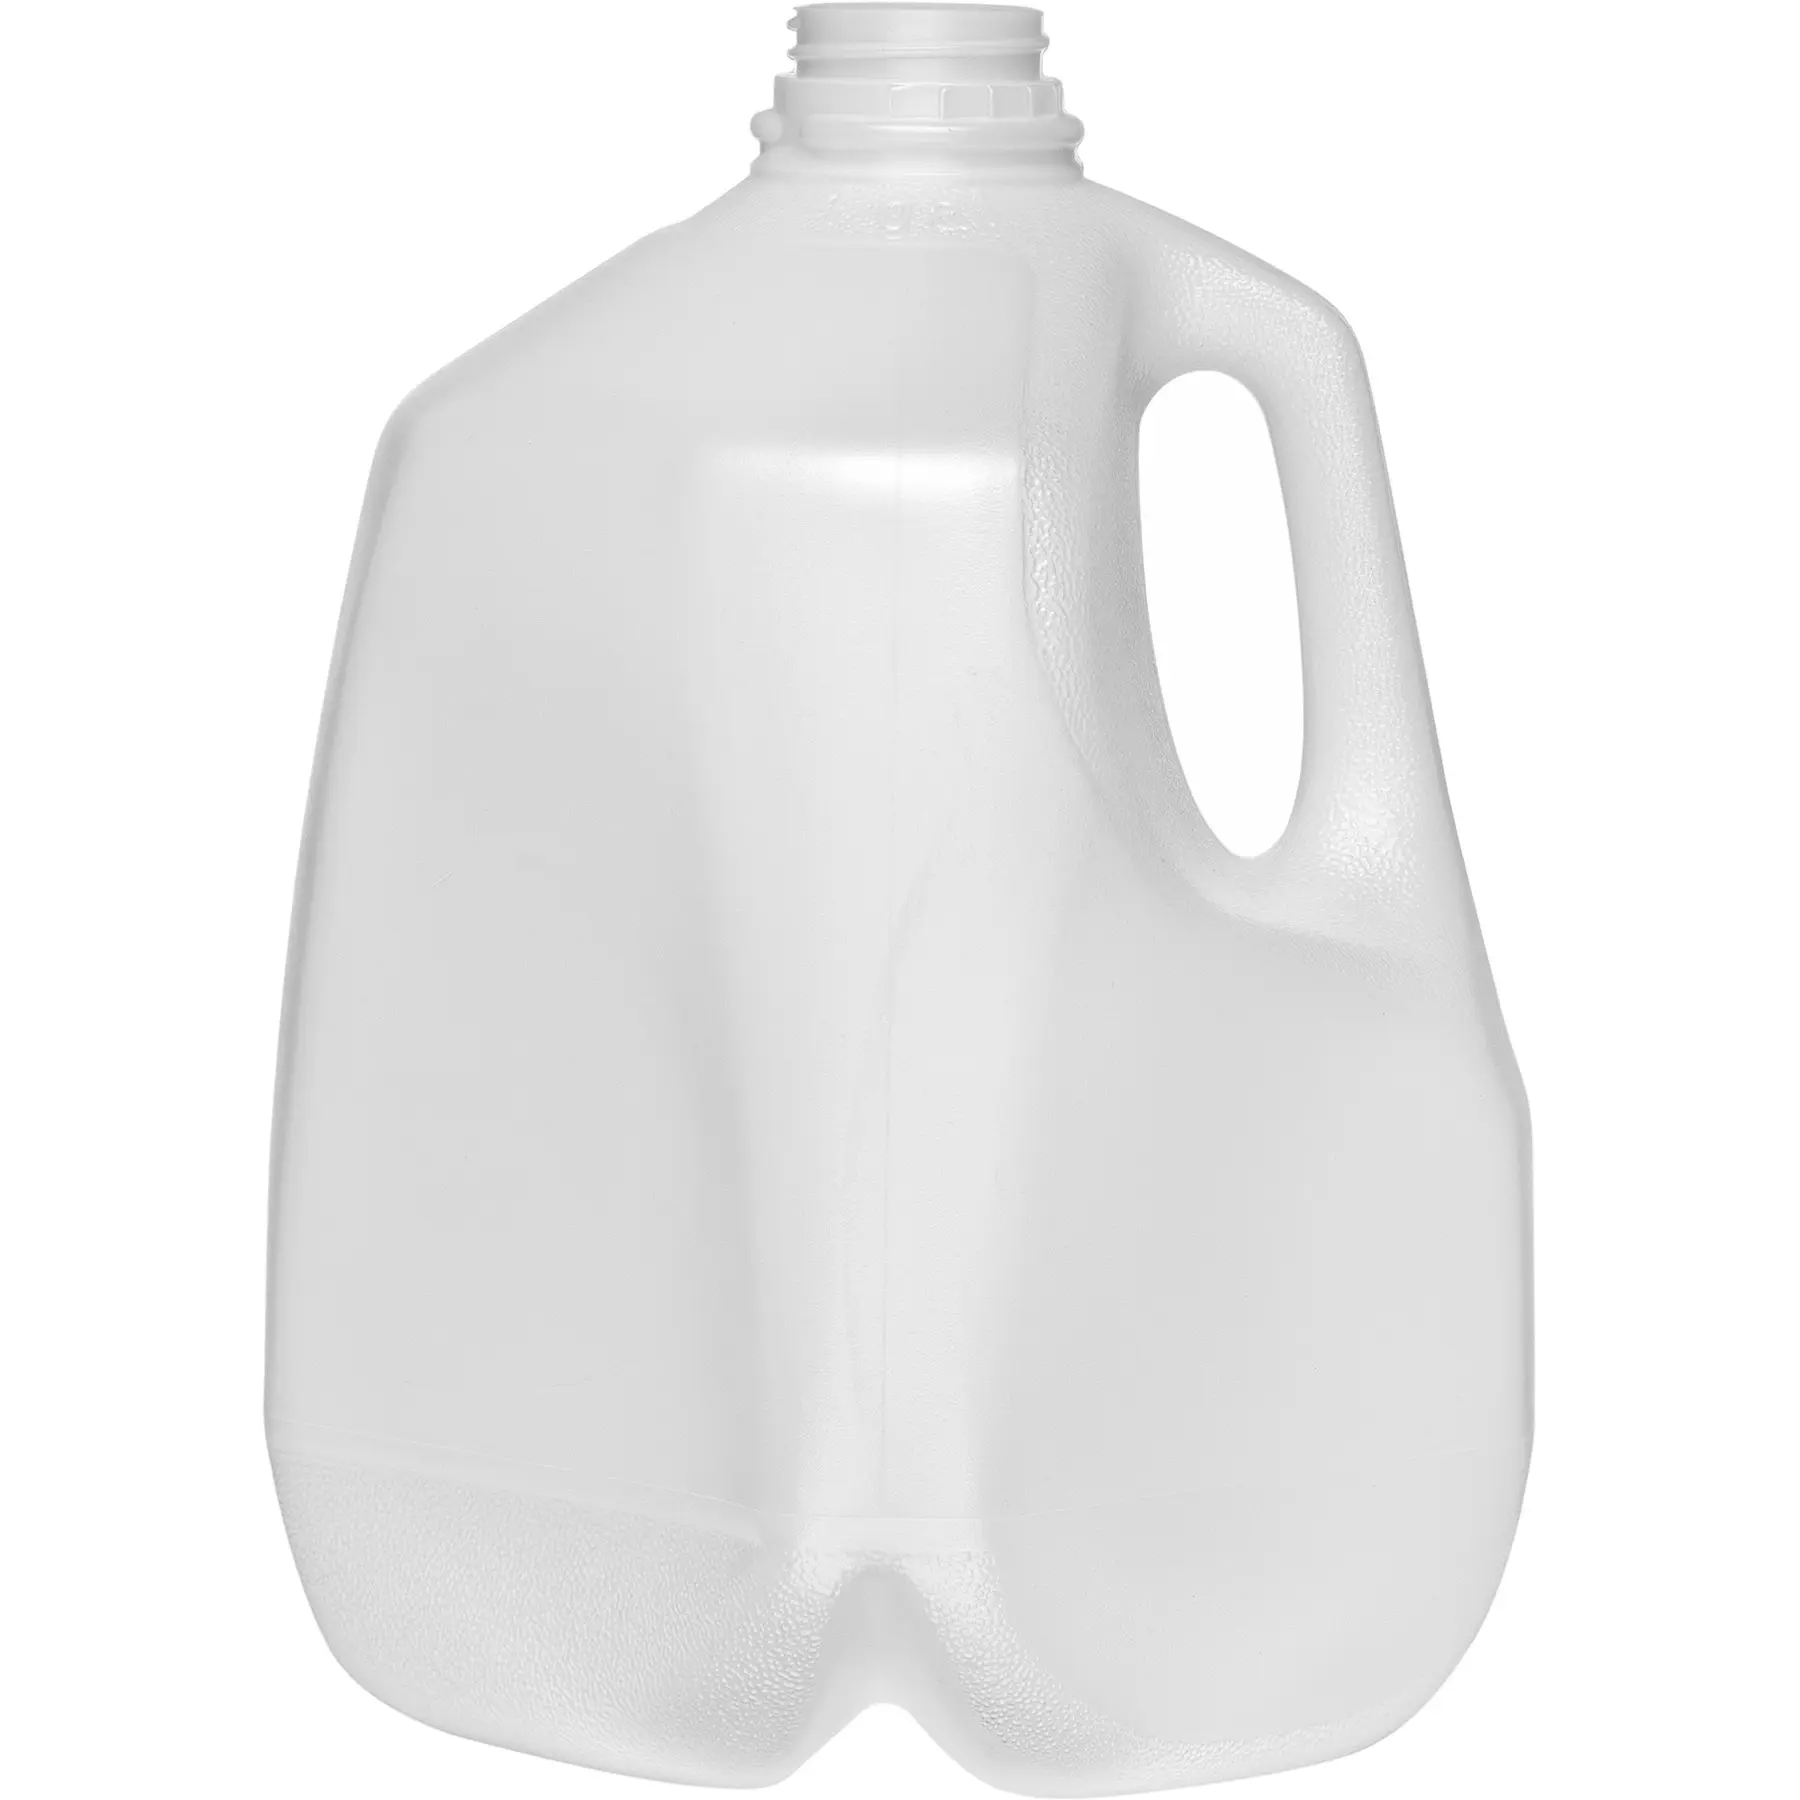 plastic gallon jug - How much is in a gallon jug